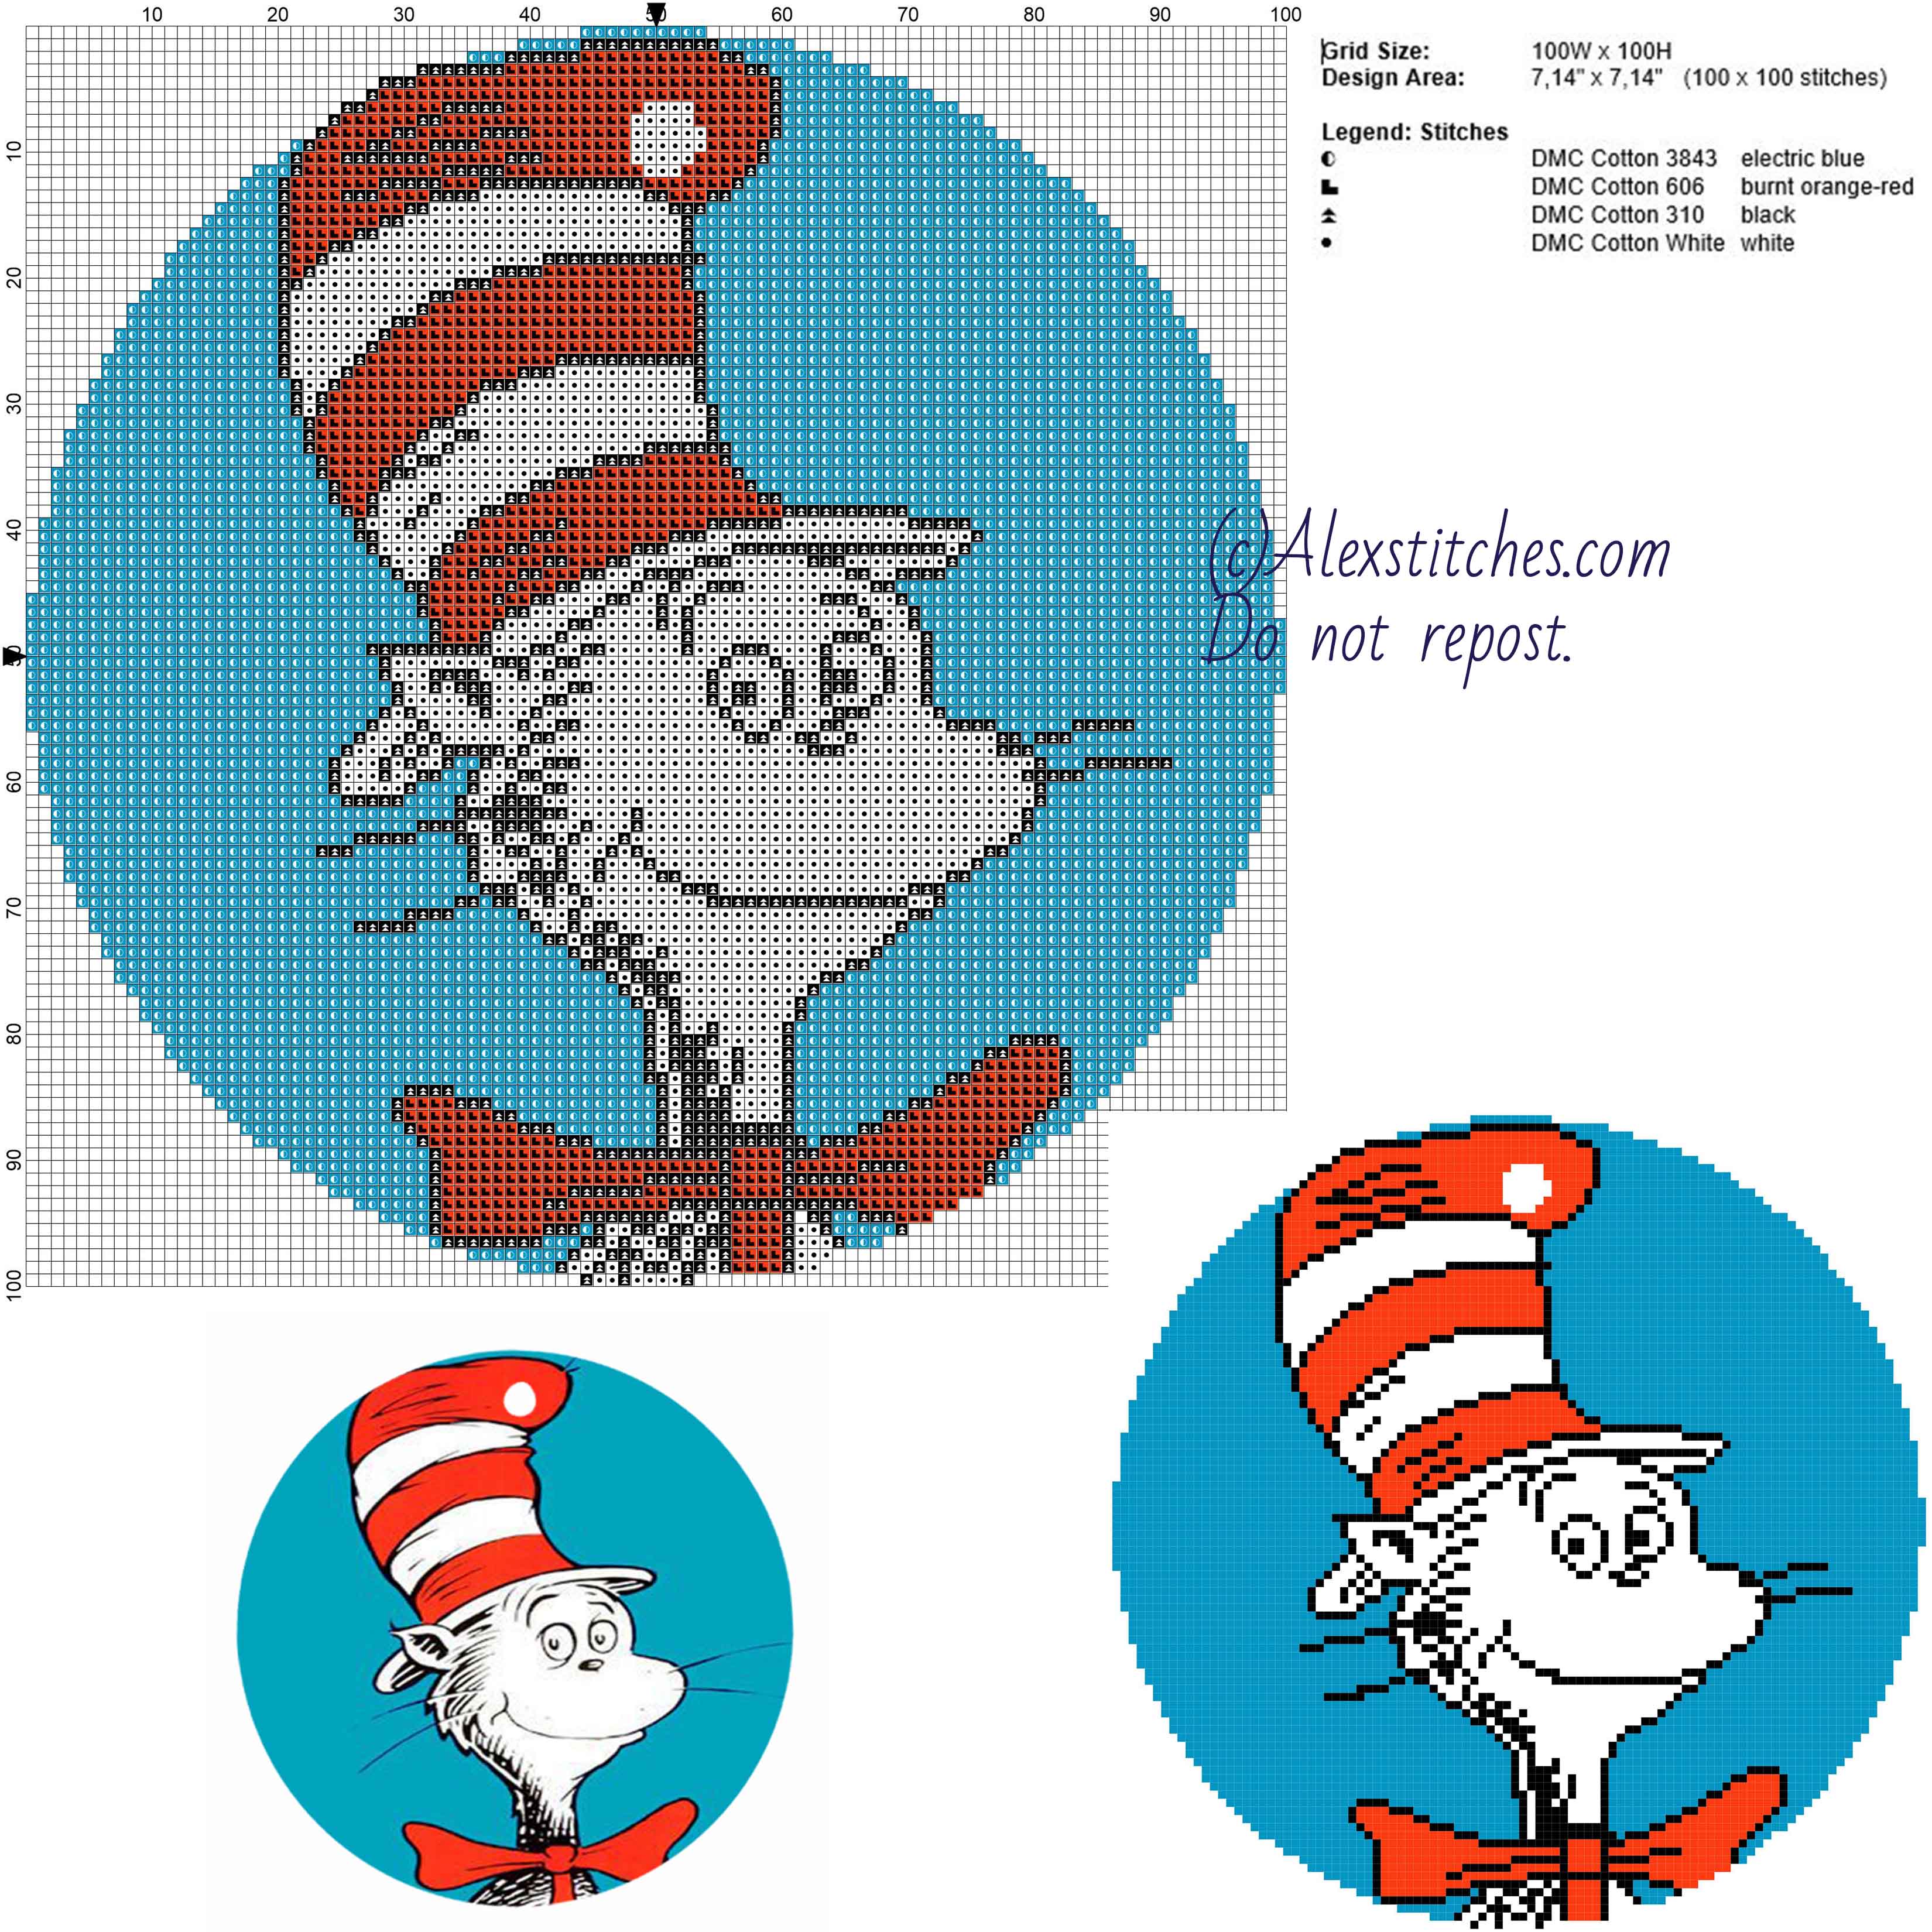 The Cat in the hat (Dr_ Seuss) free cross stitch pattern 100x100 4 colors